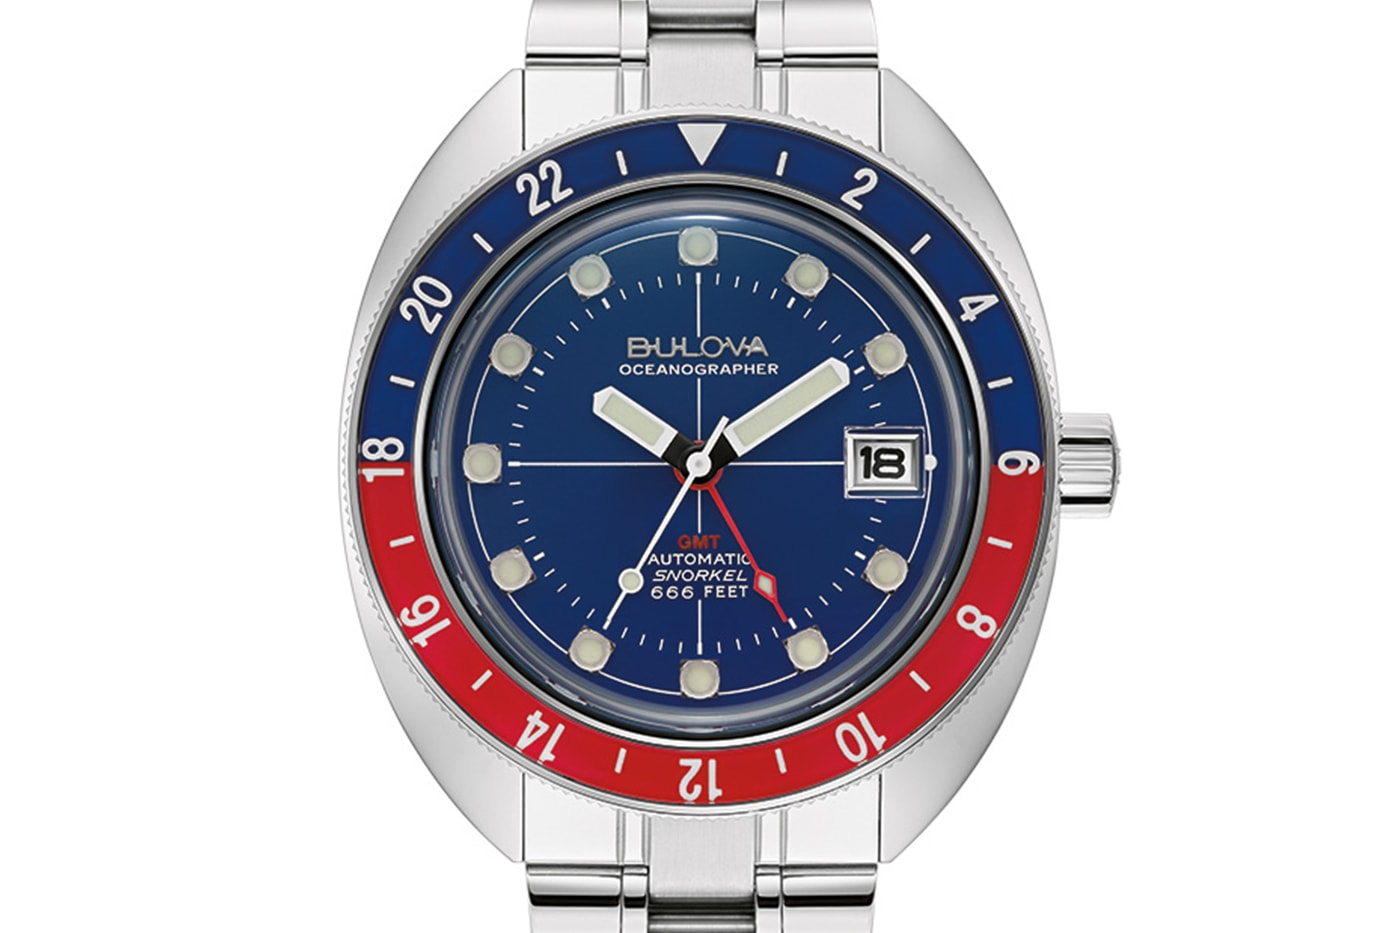 Bulova New Oceanographer GMT Collection Release Info